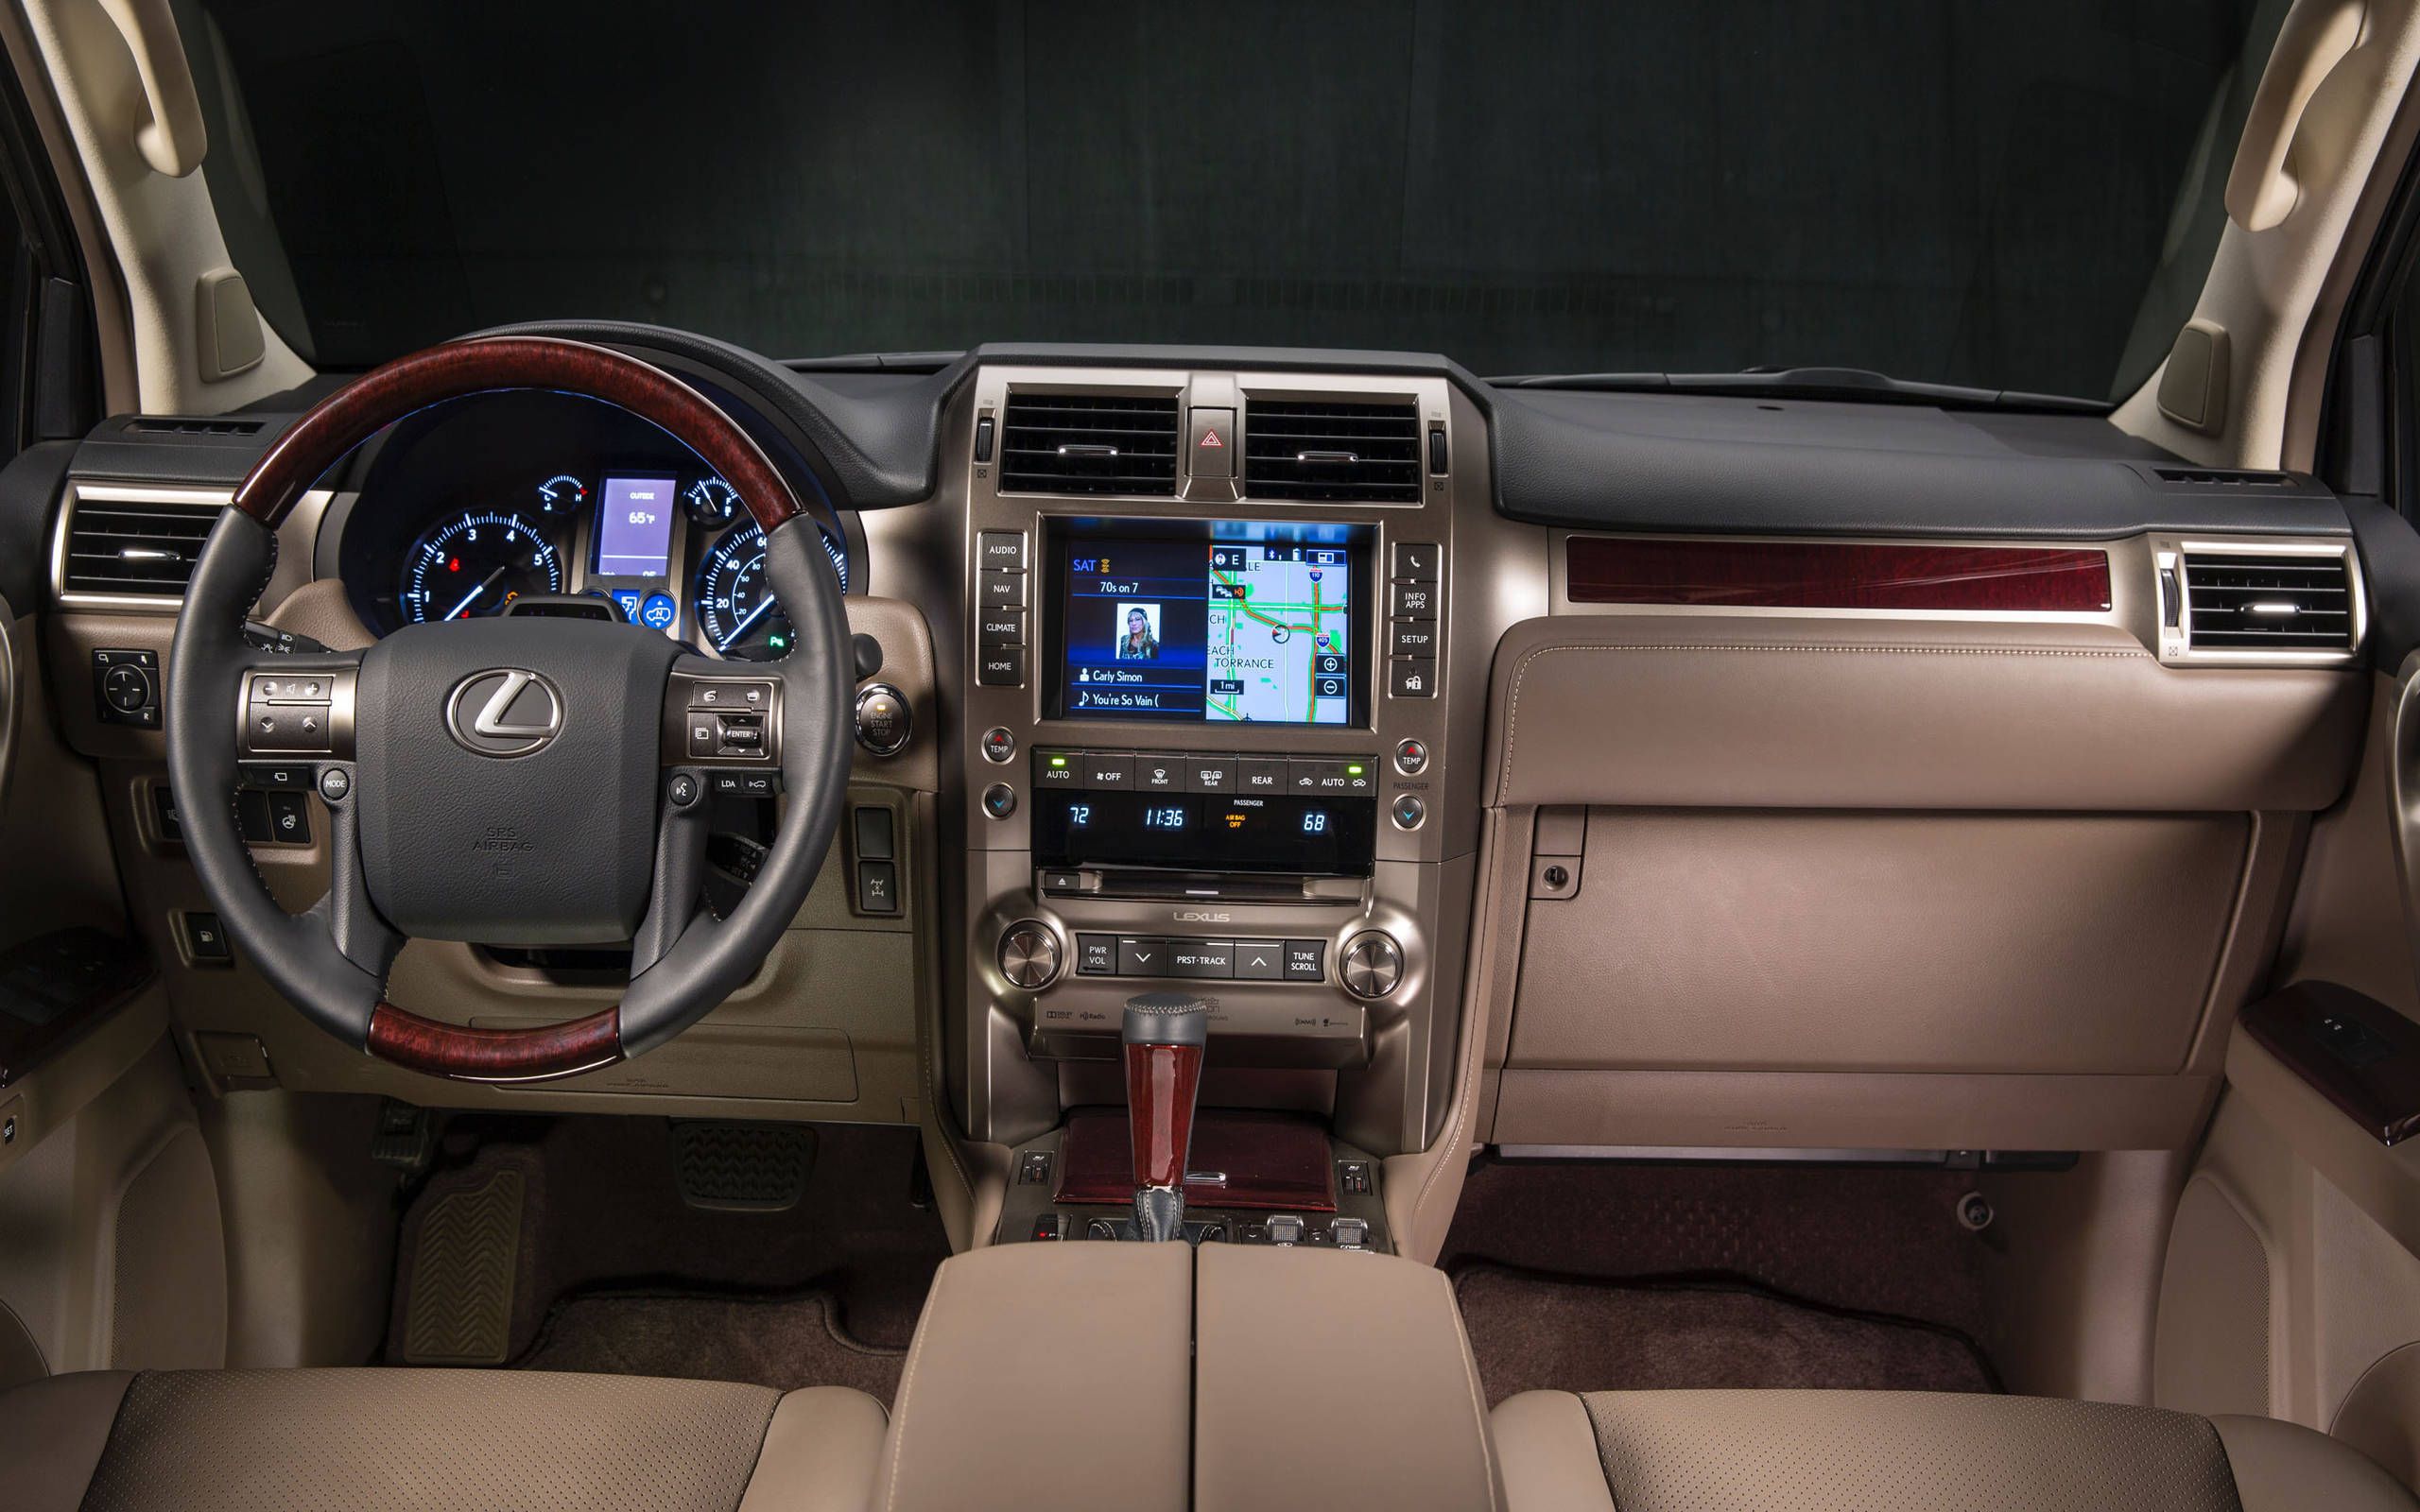 2015 Lexus GX460 Luxury review notes: Ready for some dirt